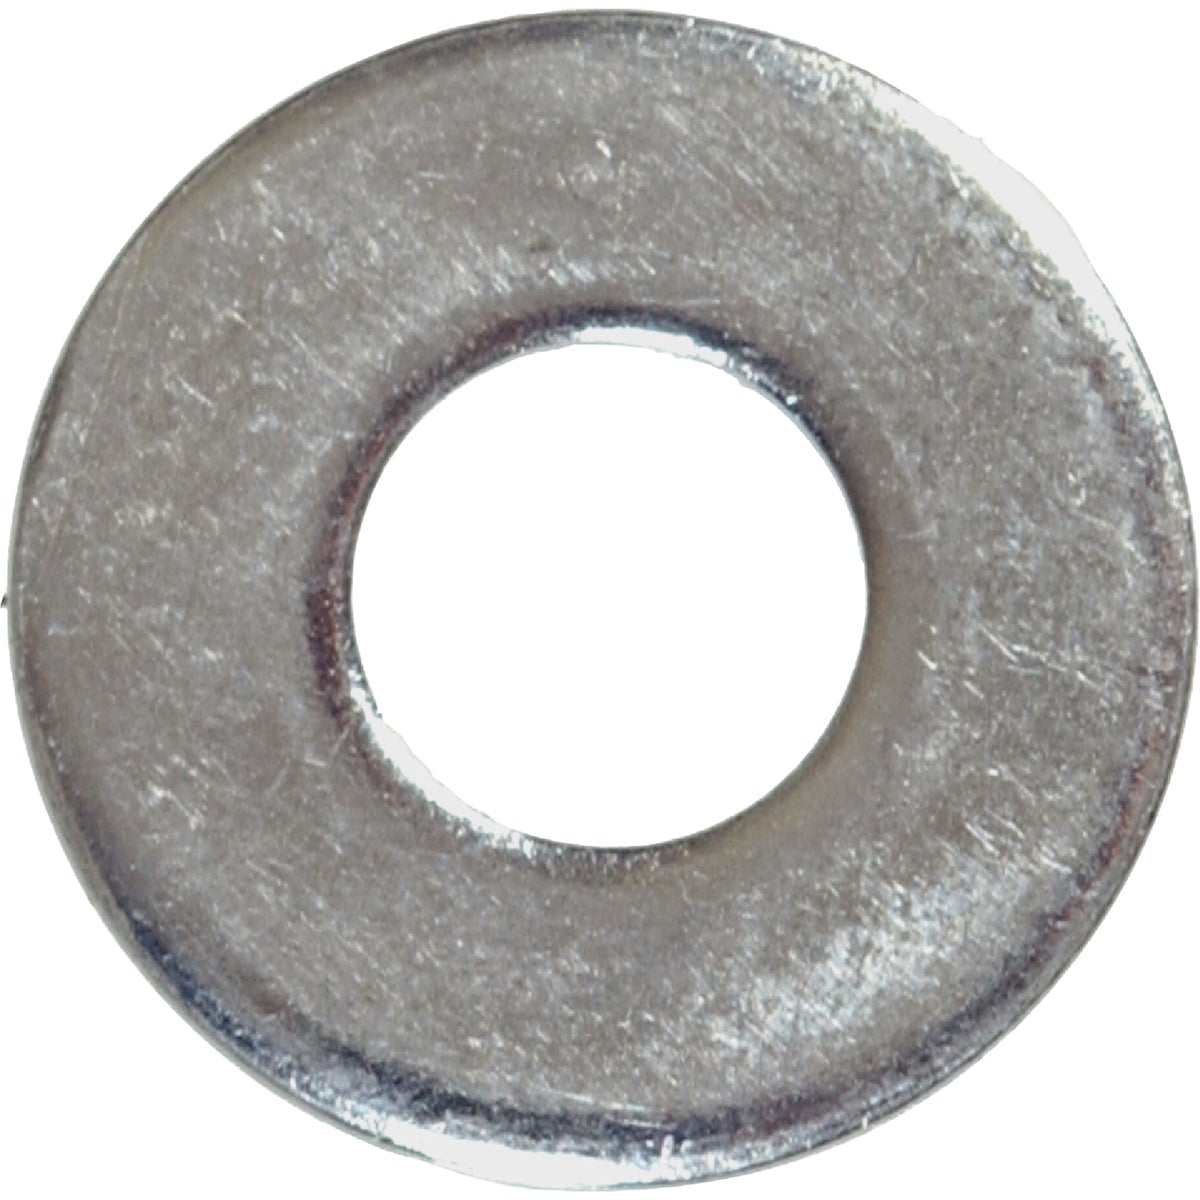 Item 766470, Zinc steel flat washer with wide pattern is used to spread the load of a 